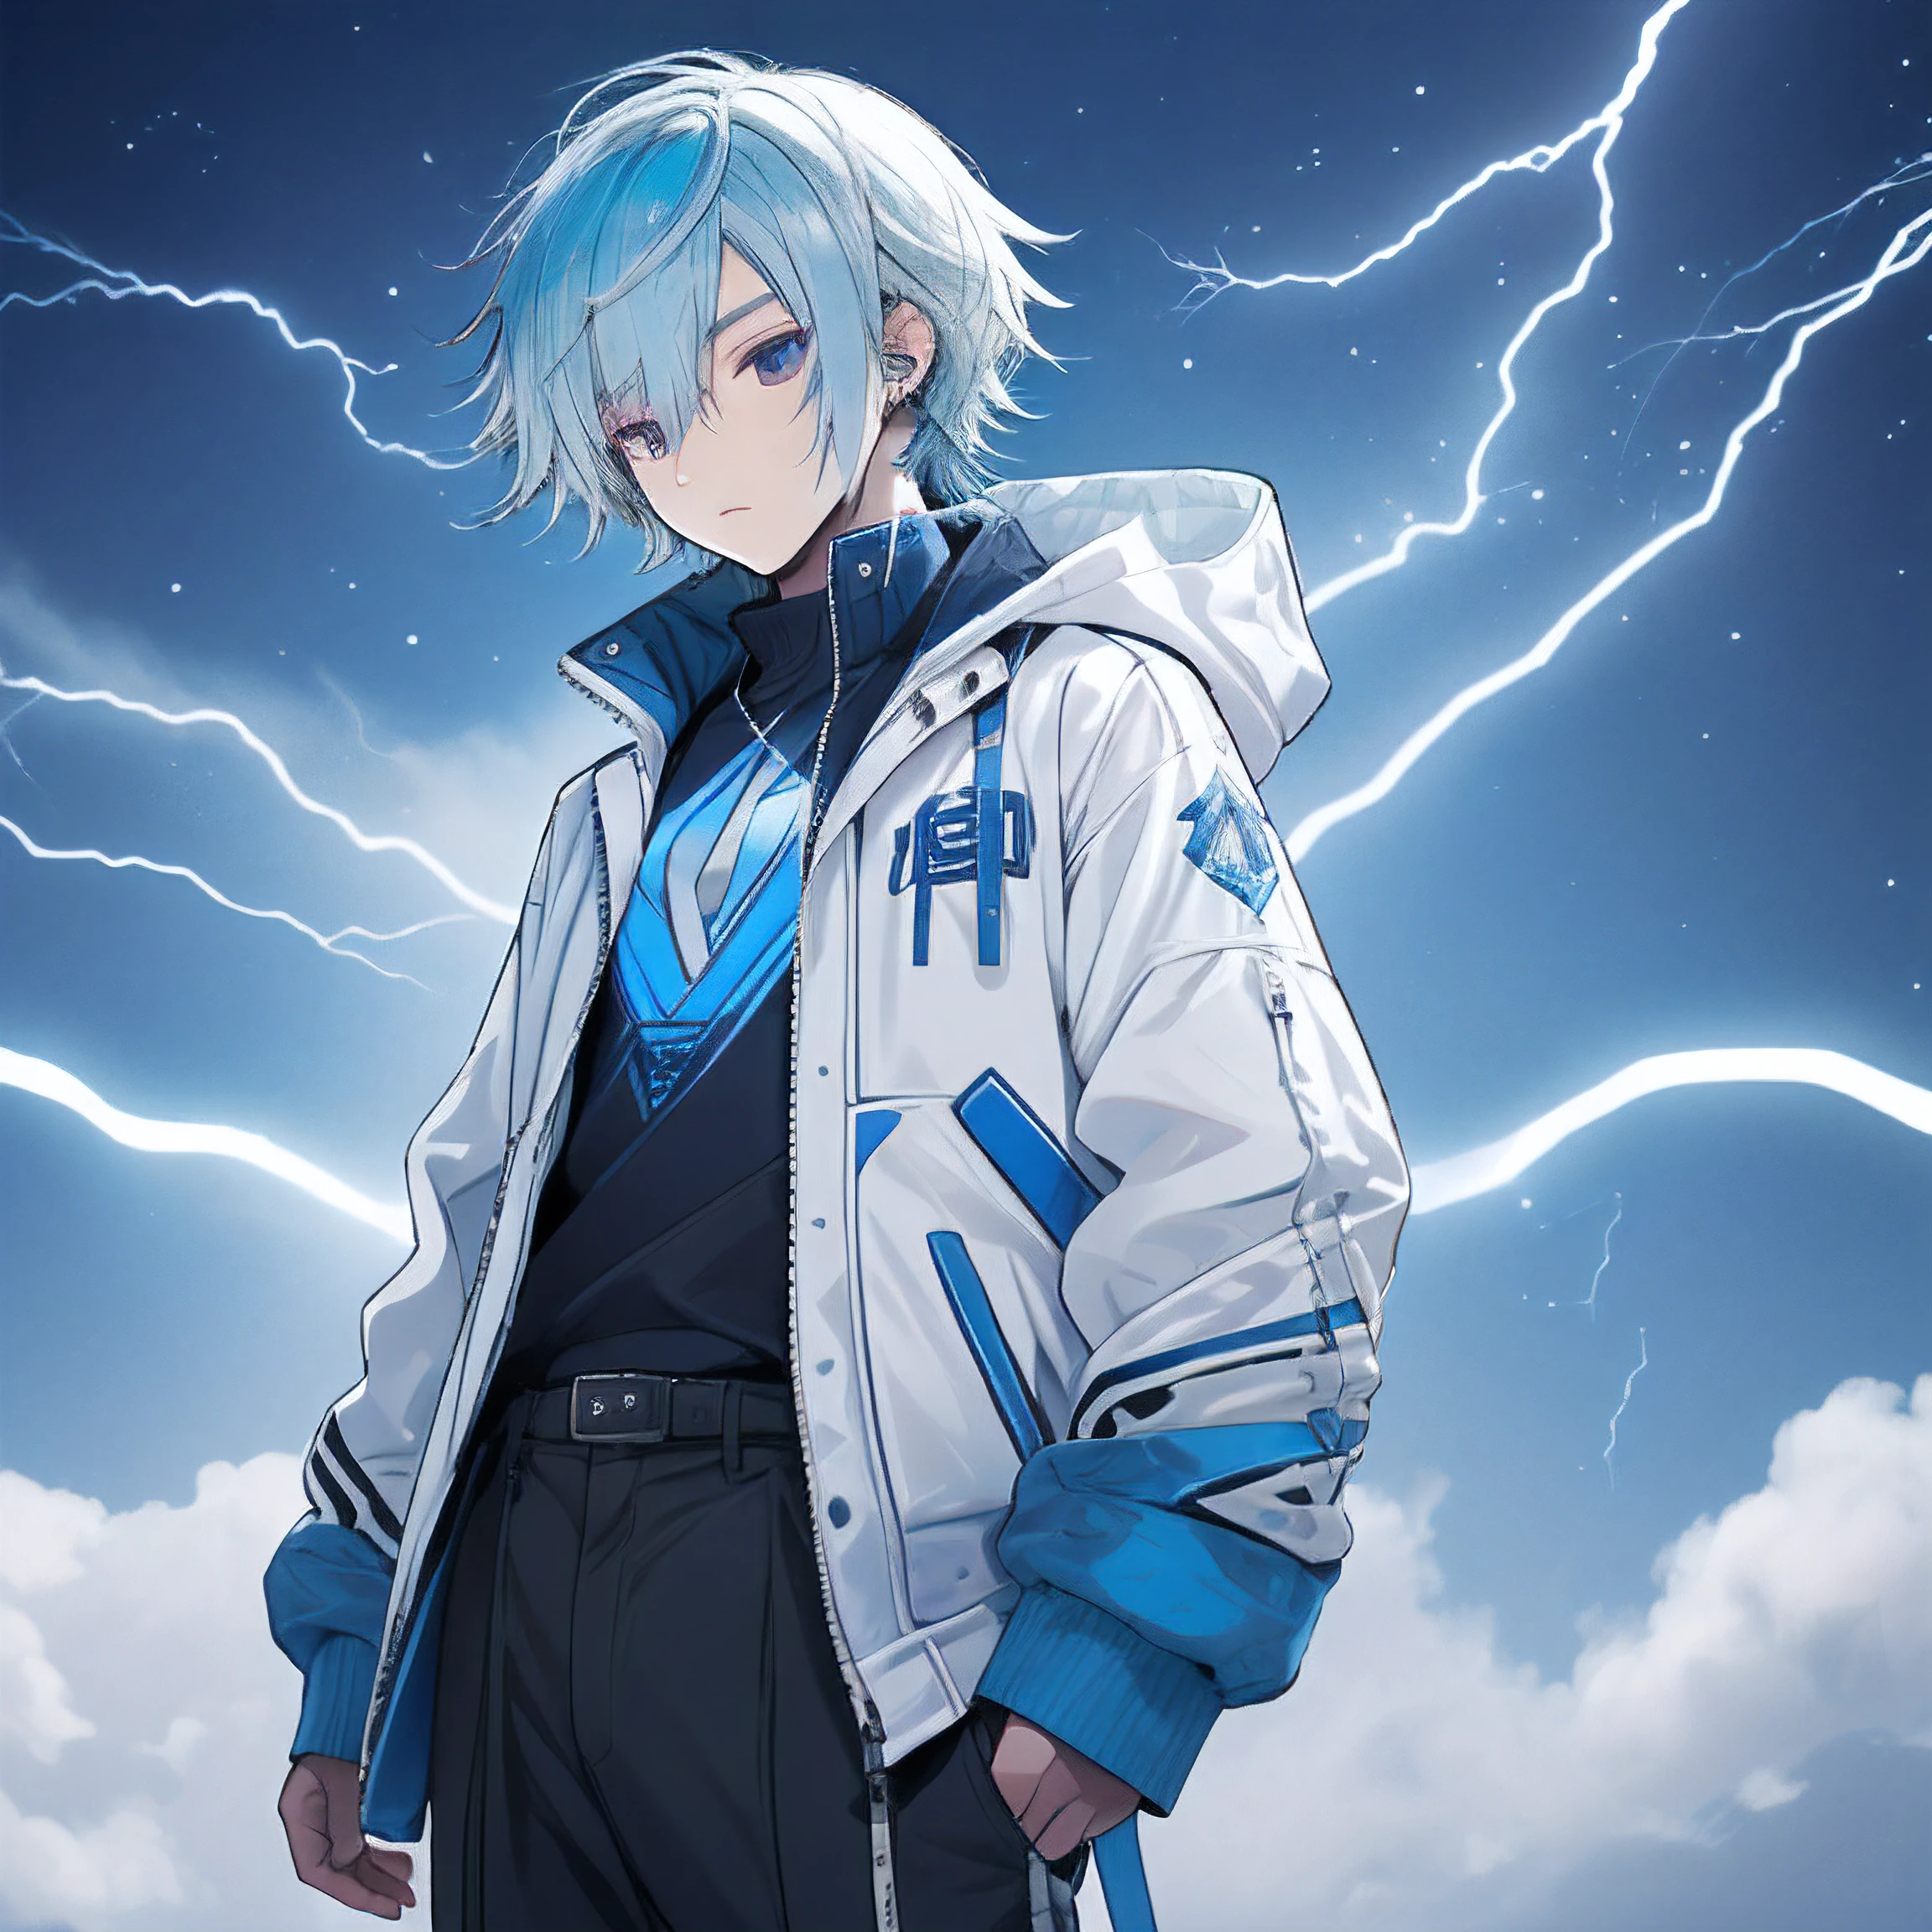 Anime boy with blue hair and white jacket standing in front of 